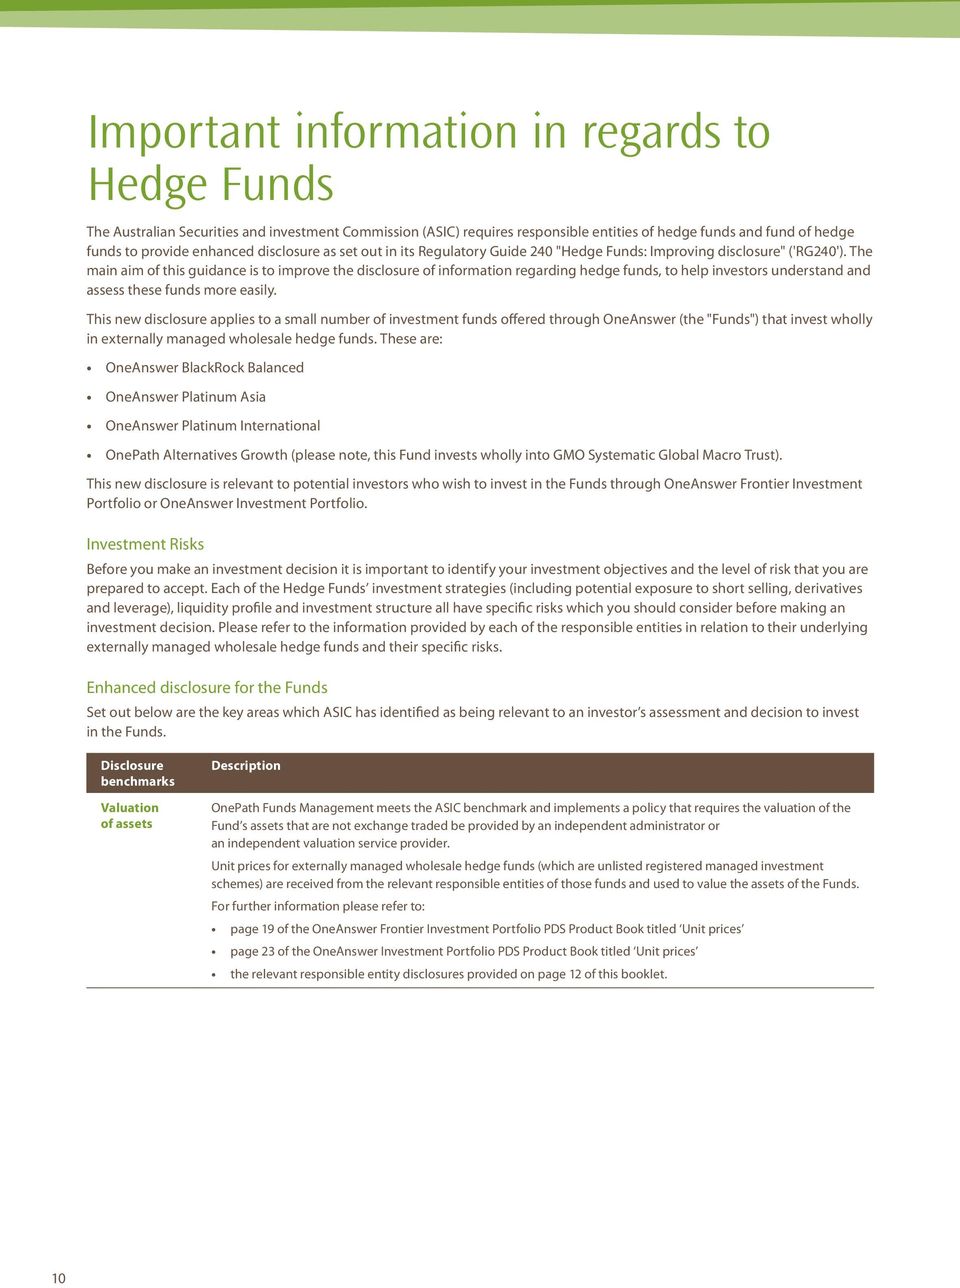 The main aim of this guidance is to improve the disclosure of information regarding hedge funds, to help investors understand and assess these funds more easily.